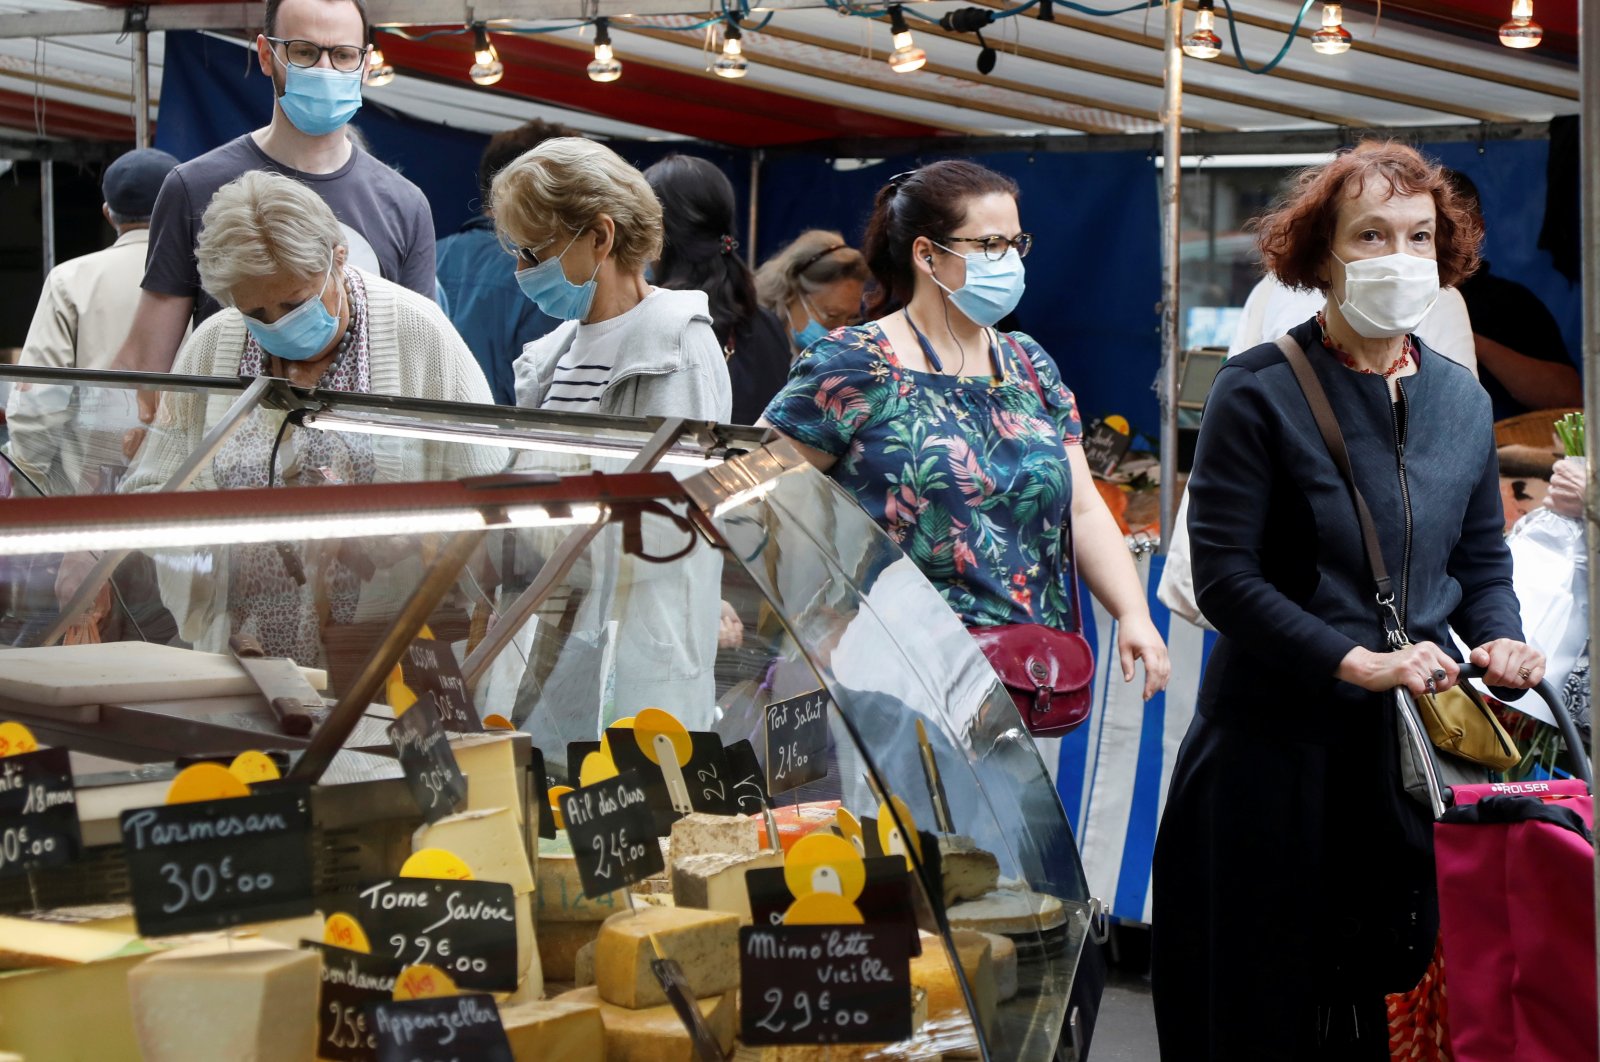 People wear protective masks while shopping at an open-air market in Paris, France, Aug. 29, 2020. (Reuters Photo)